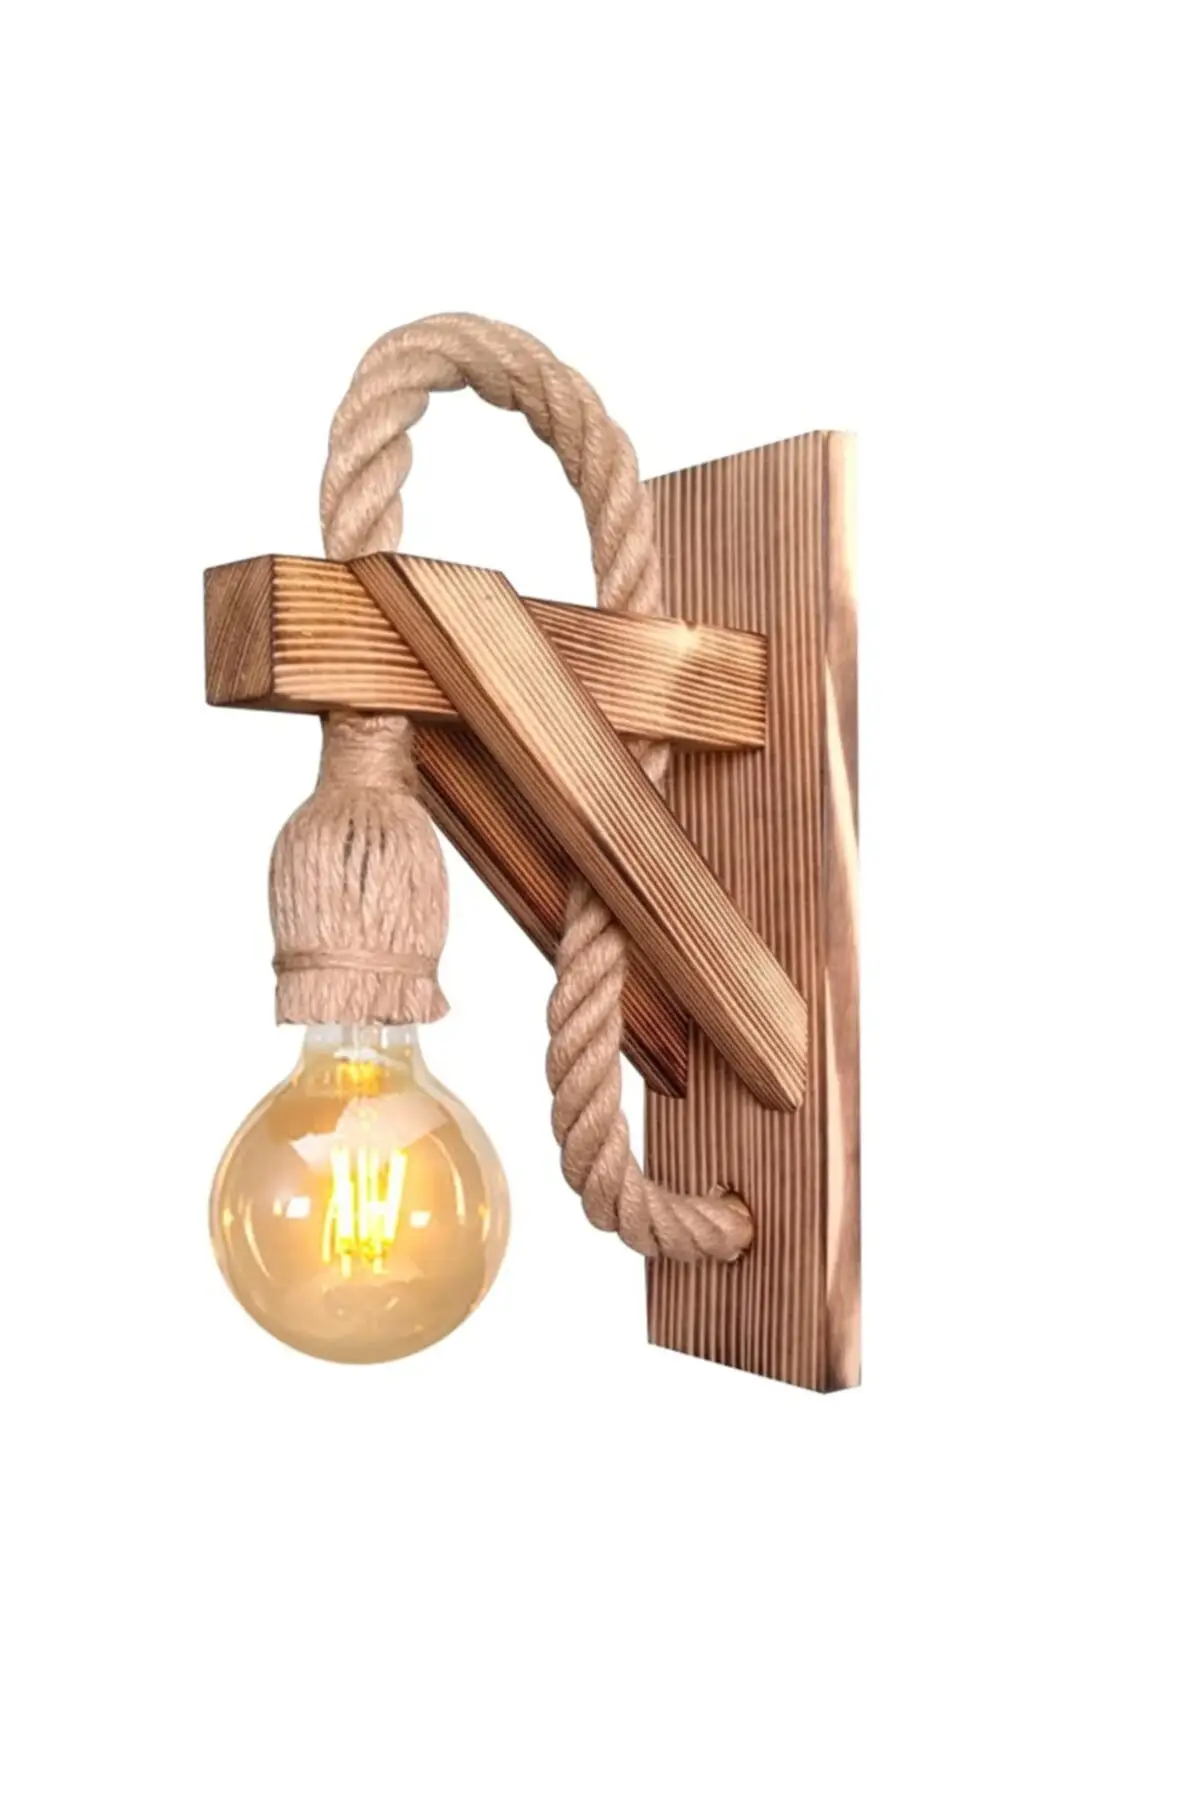 Sconce Wood Sconce Wall Lamp Wooden Sconce Wall Lamp For Cafe Hotel Restaurant Fashion Chandelier Trend Wall Lamb House Kitchen